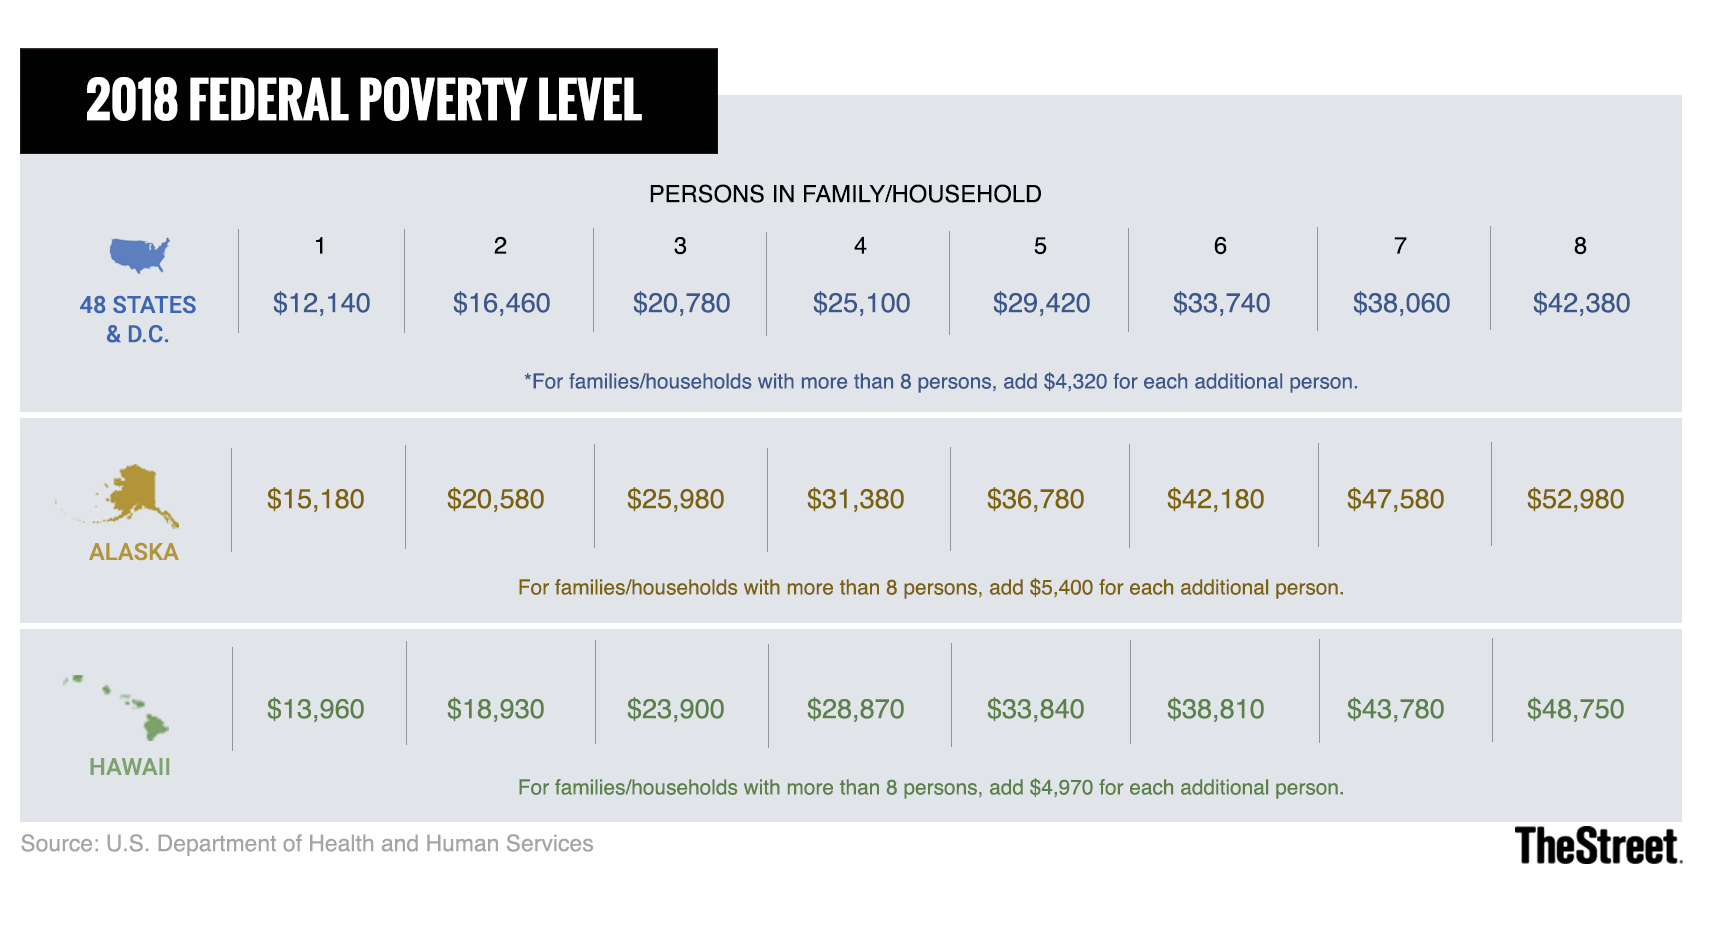 what is the 2018 federal poverty level in the u.s.? - thestreet